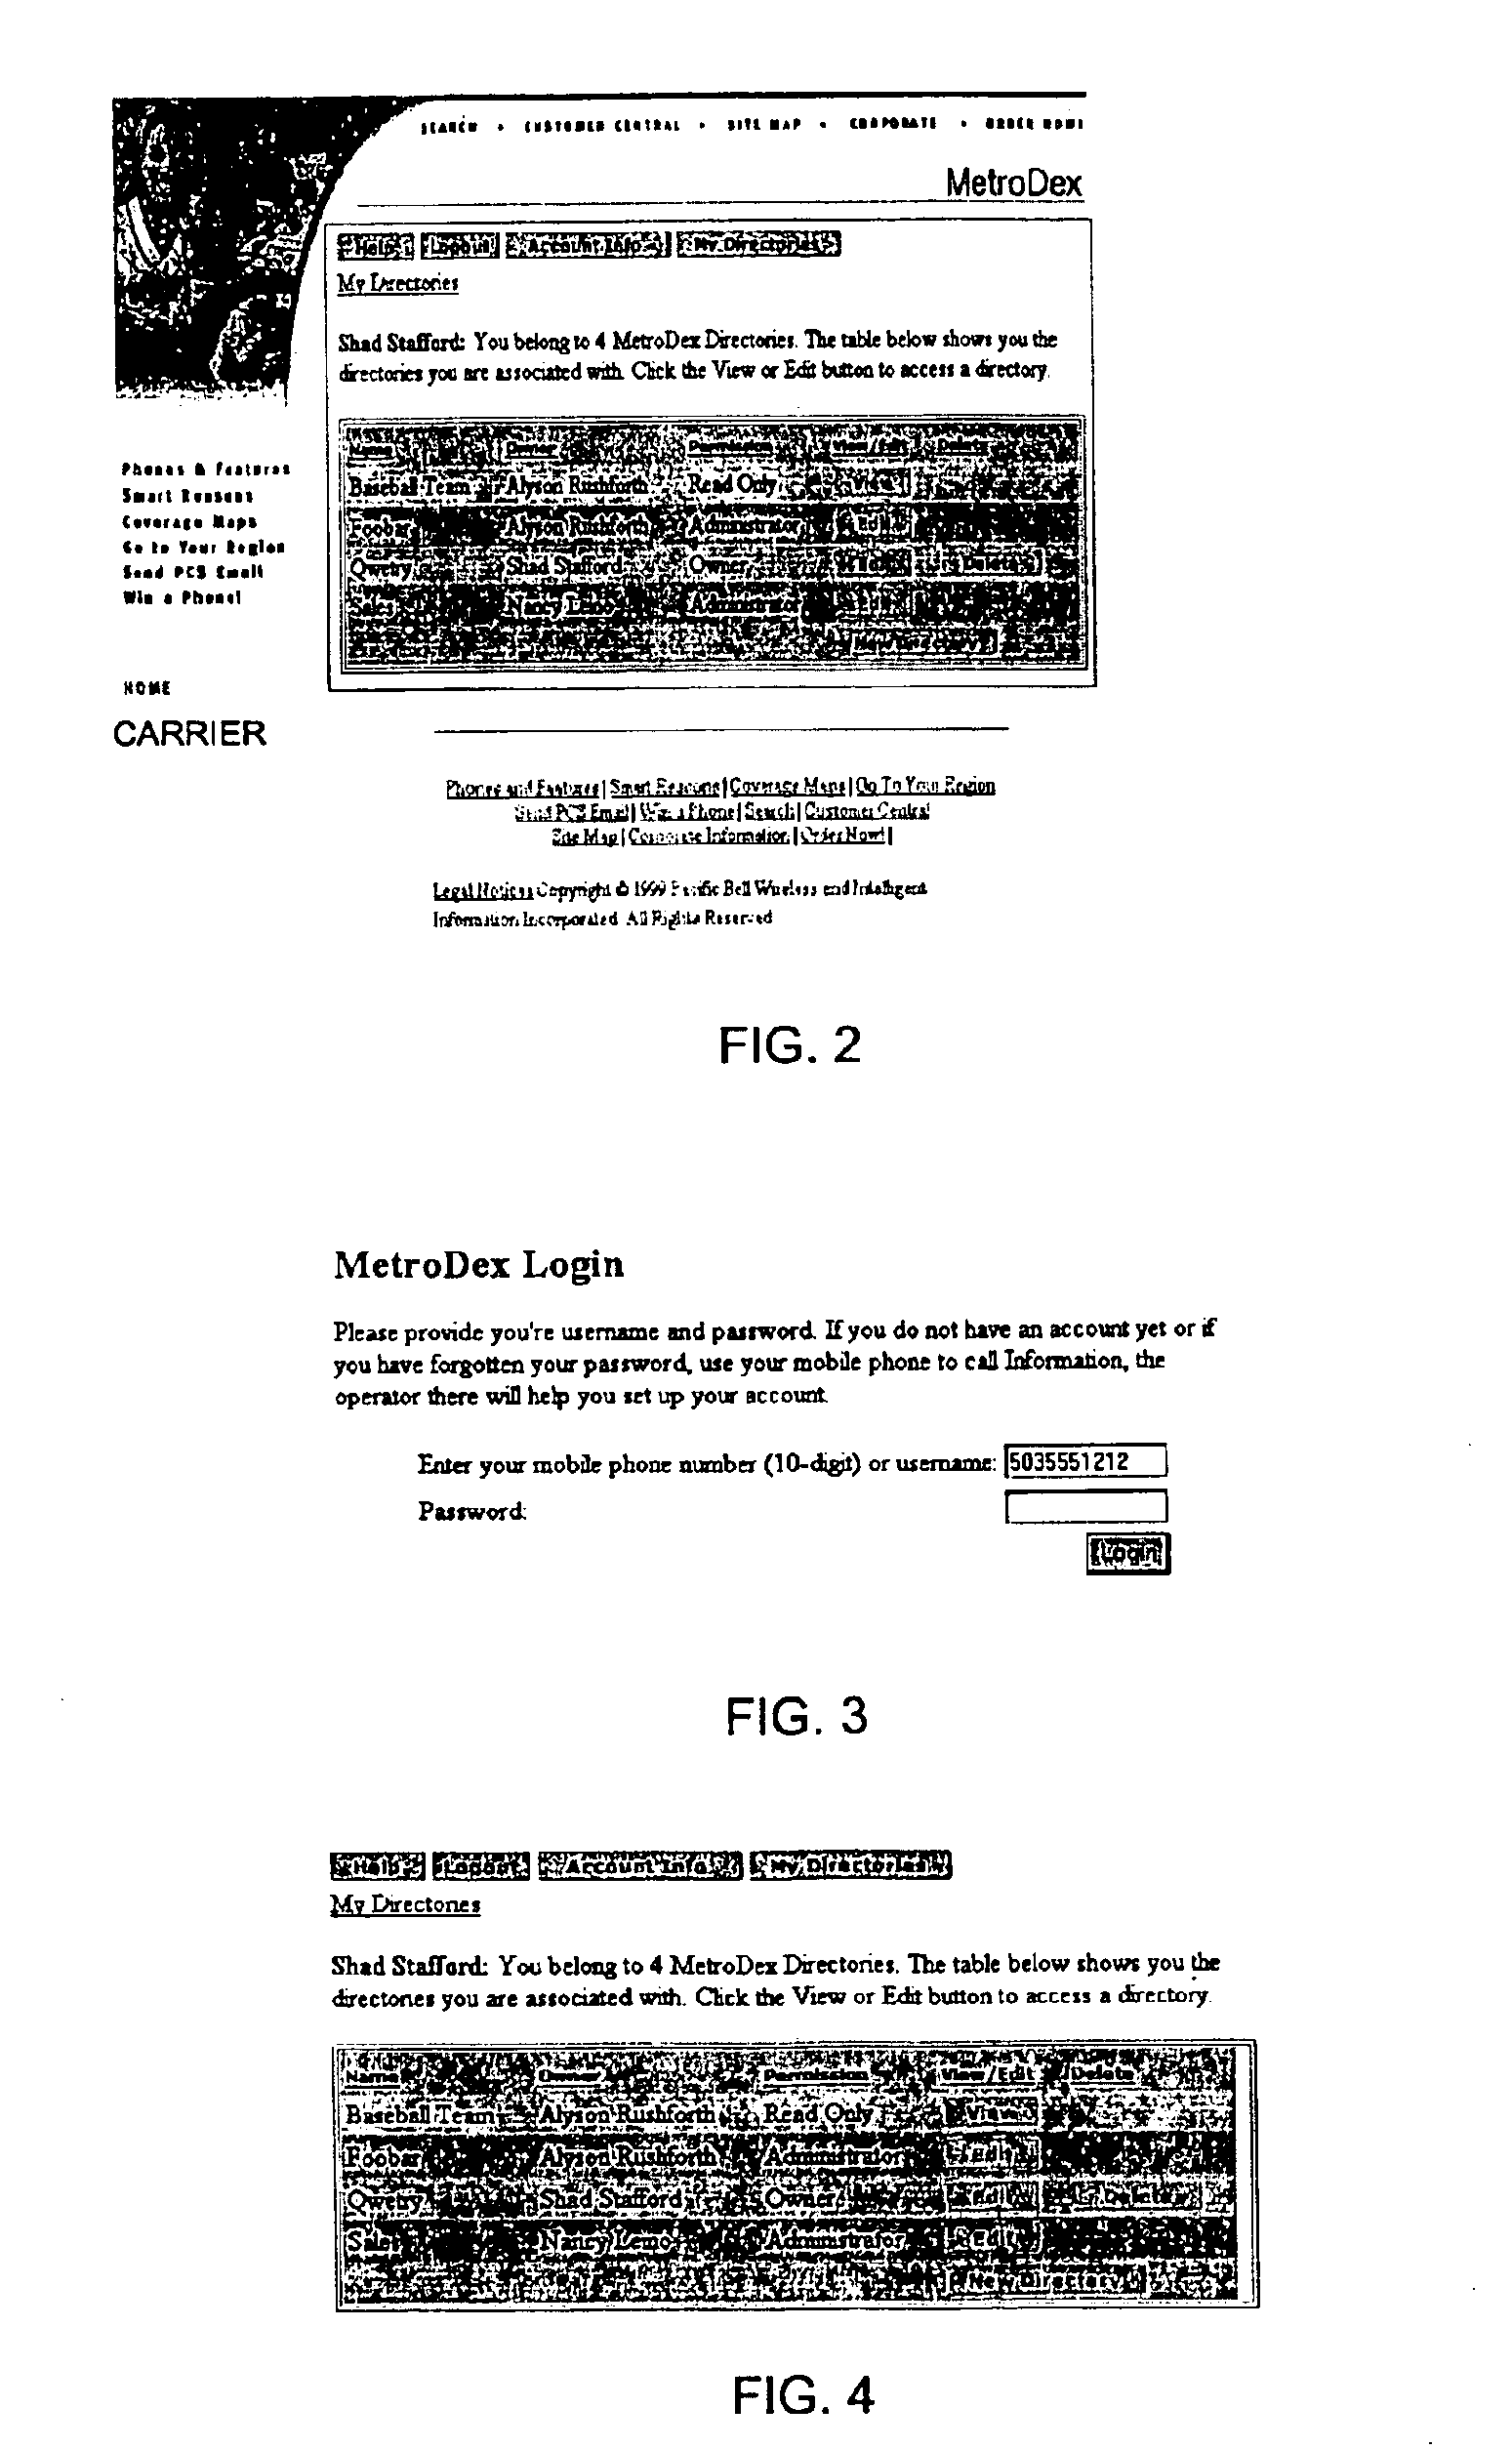 Enhanced directory assistance service providing individual or group directories